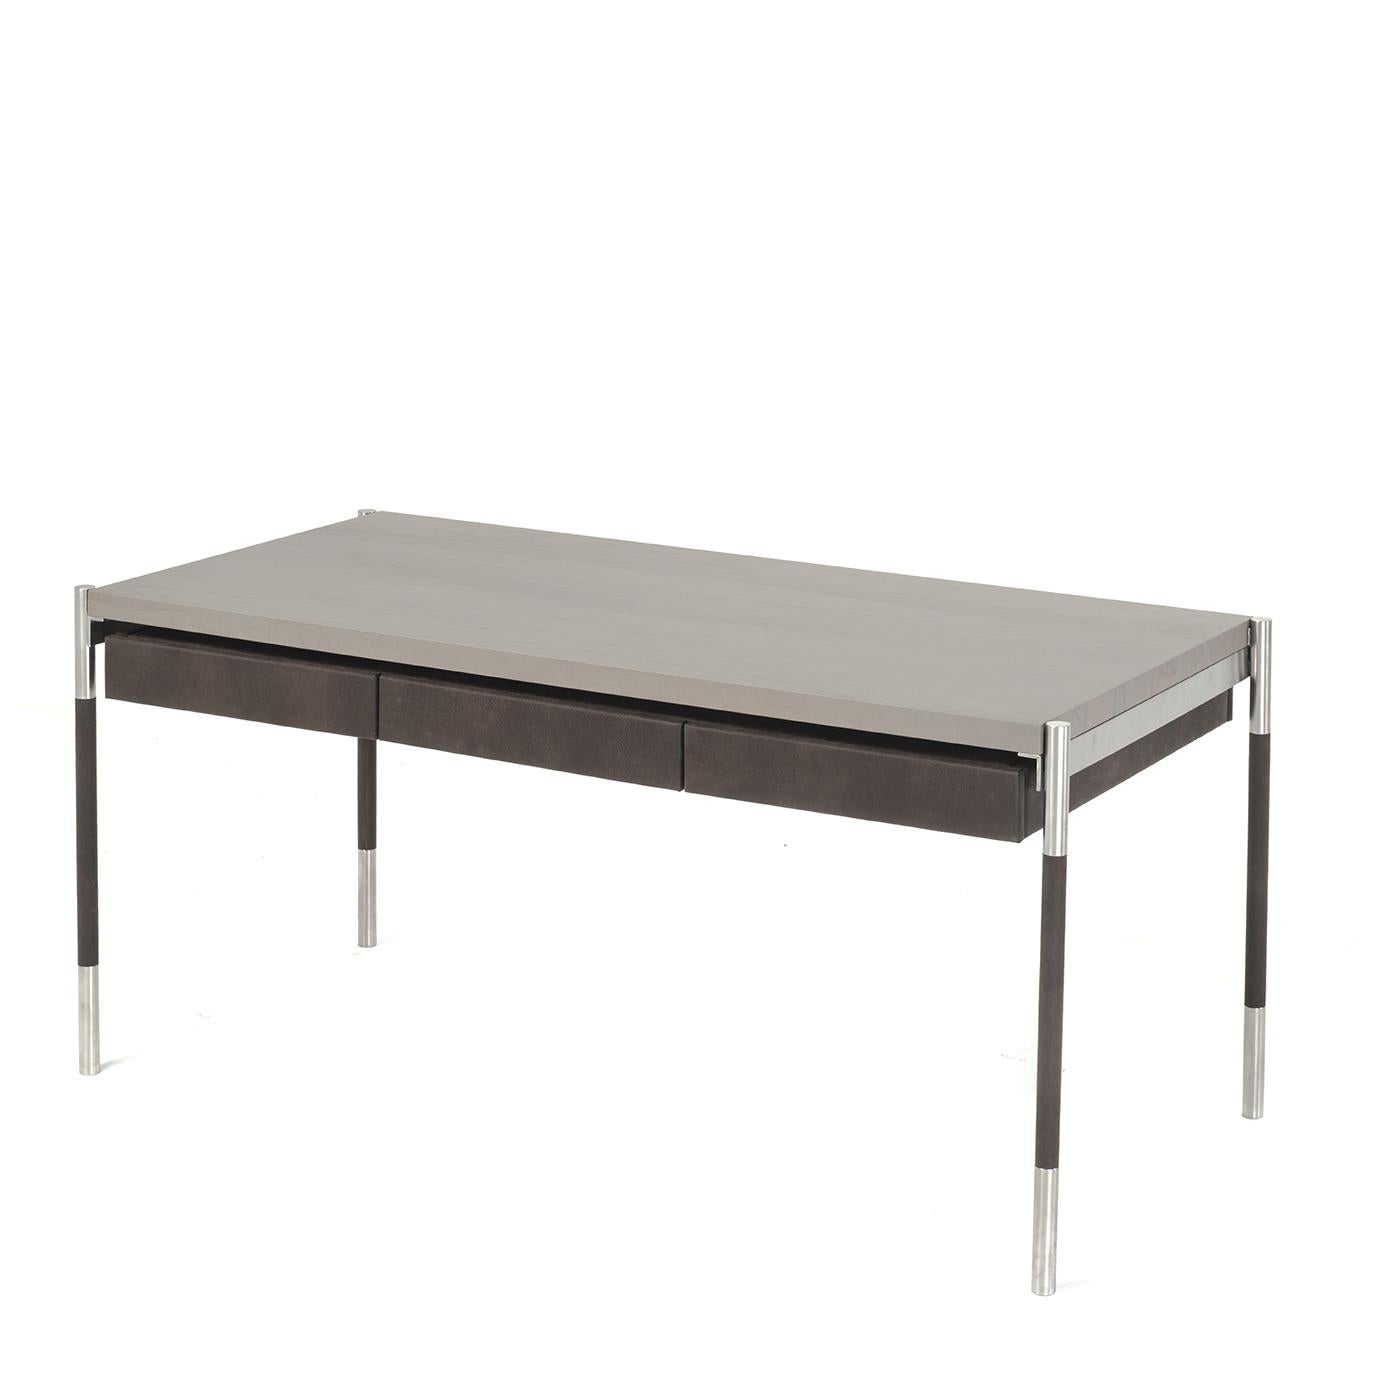 This desk features an elegant dark gray, olive wood top sitting upon a satin stainless steel structure with genuine leather detailing. Three minimalist drawers are also covered and lined in genuine leather. This item is both practical and stylish.